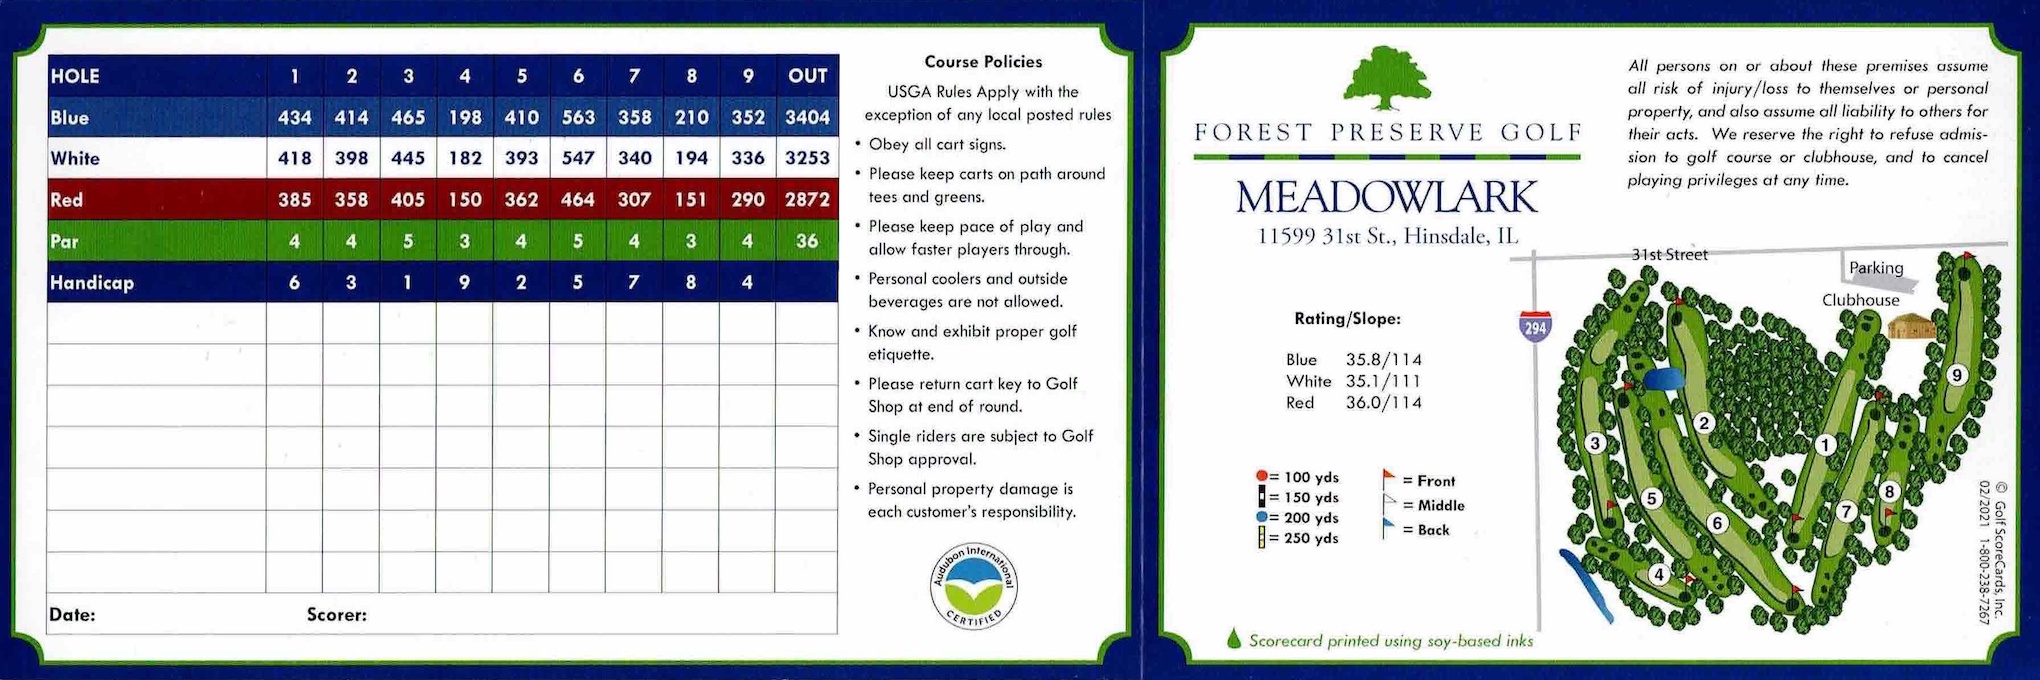 Scan of the scorecard from Meadowlark Golf Course in Hinsdale, Illinois. The back of the normal golf scorecard at Meadowlark.